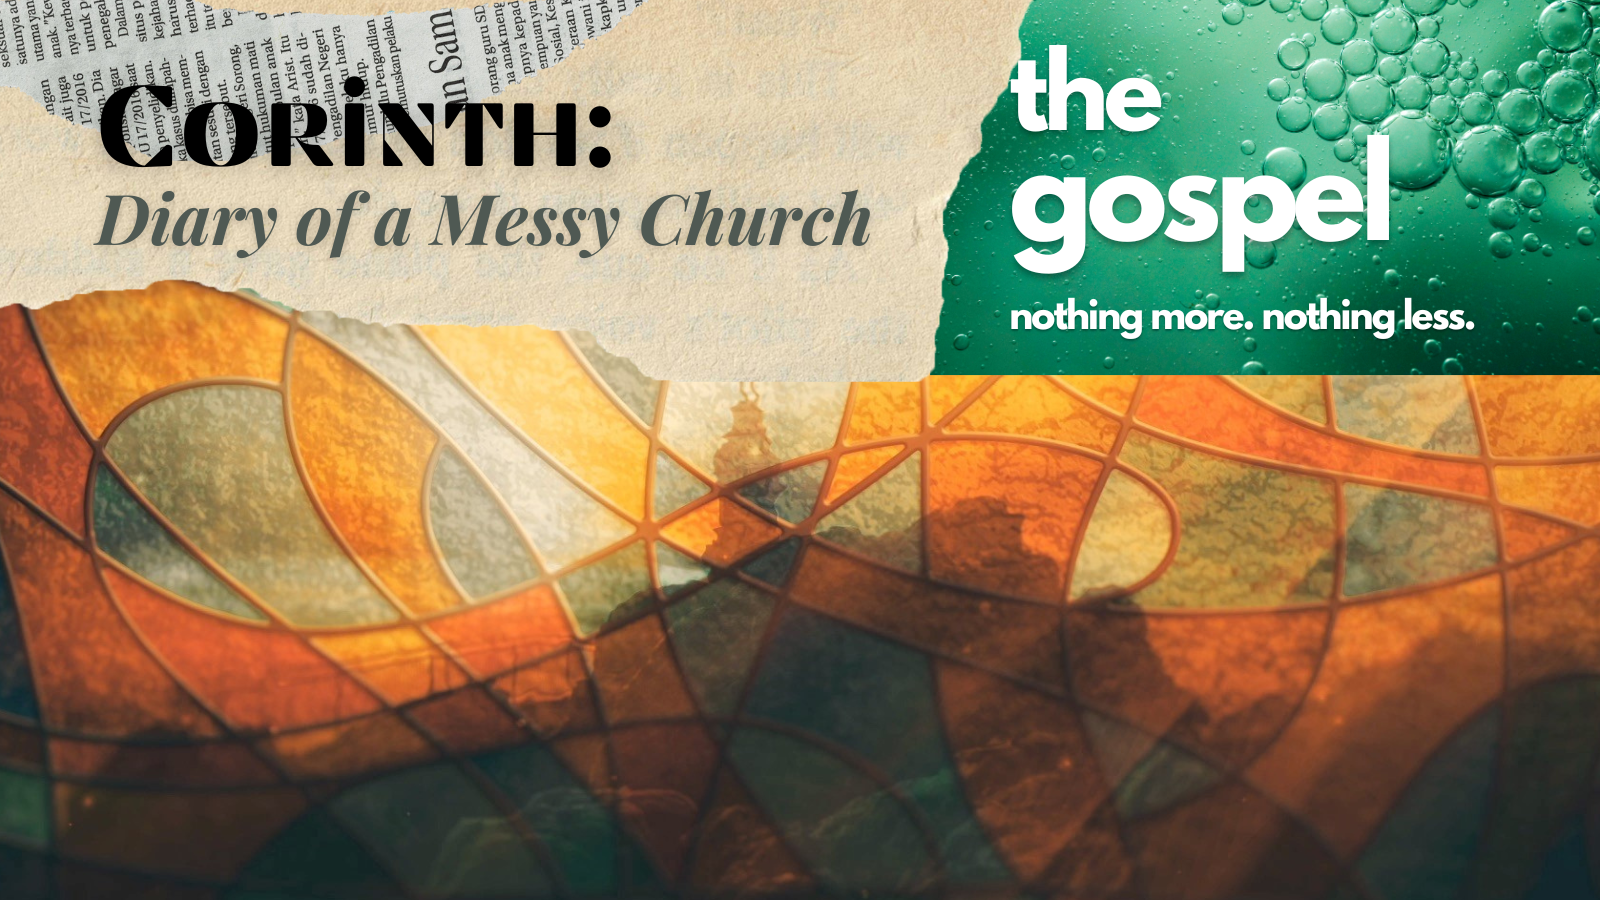 The Gospel – Nothing More, Nothing Less